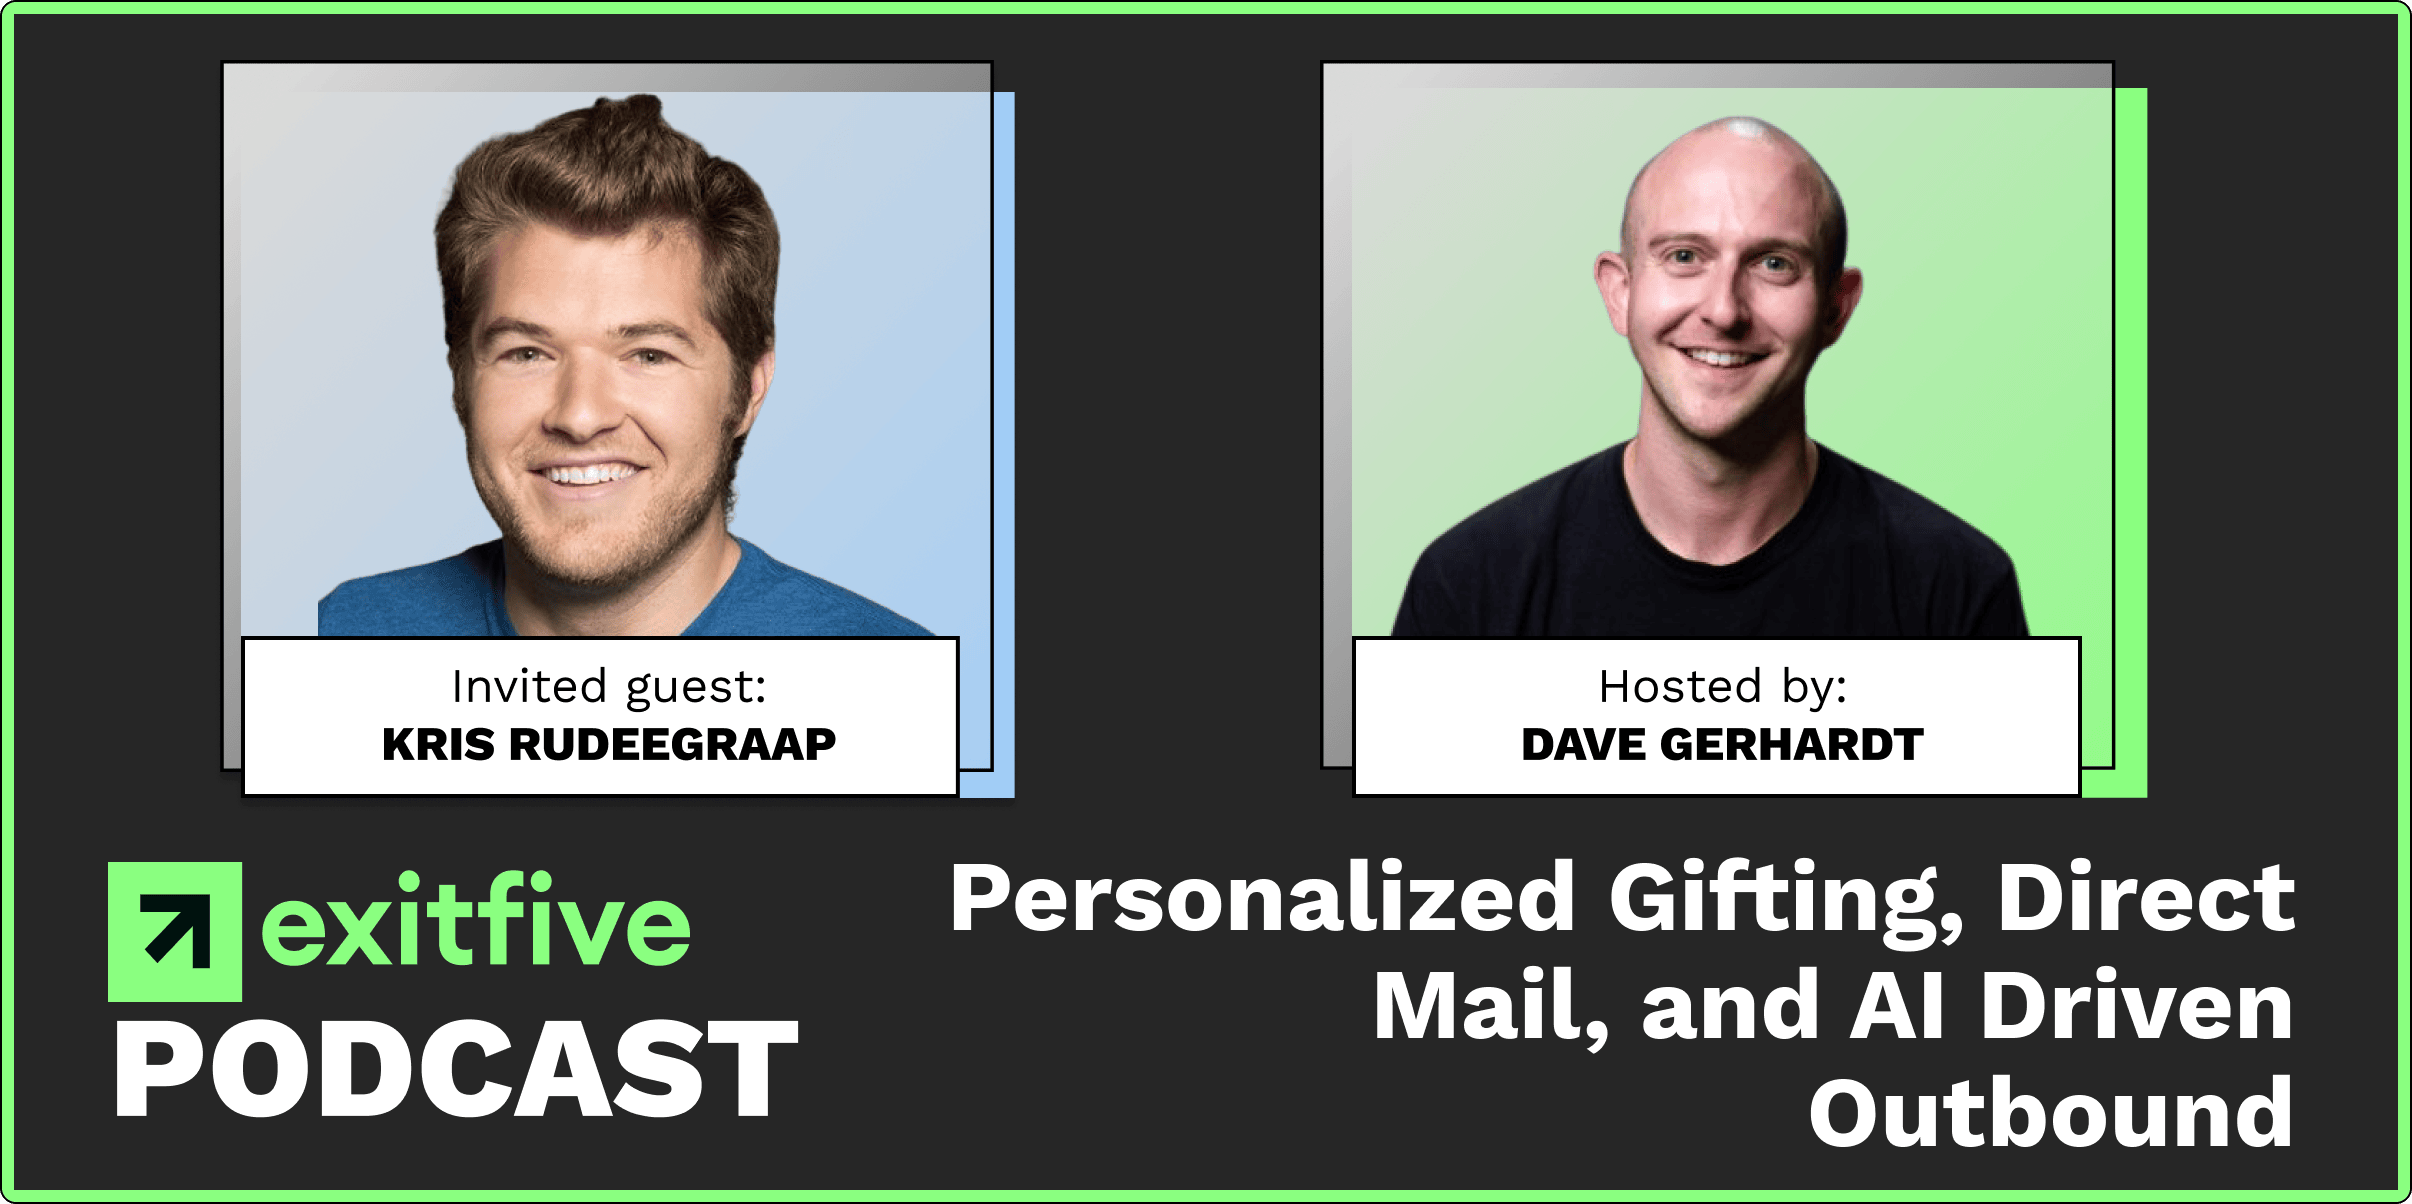 Growth | Personalized Gifting, Direct Mail, and AI Driven Outbound with Kris Rudeegraap, CEO and Founder of Sendoso